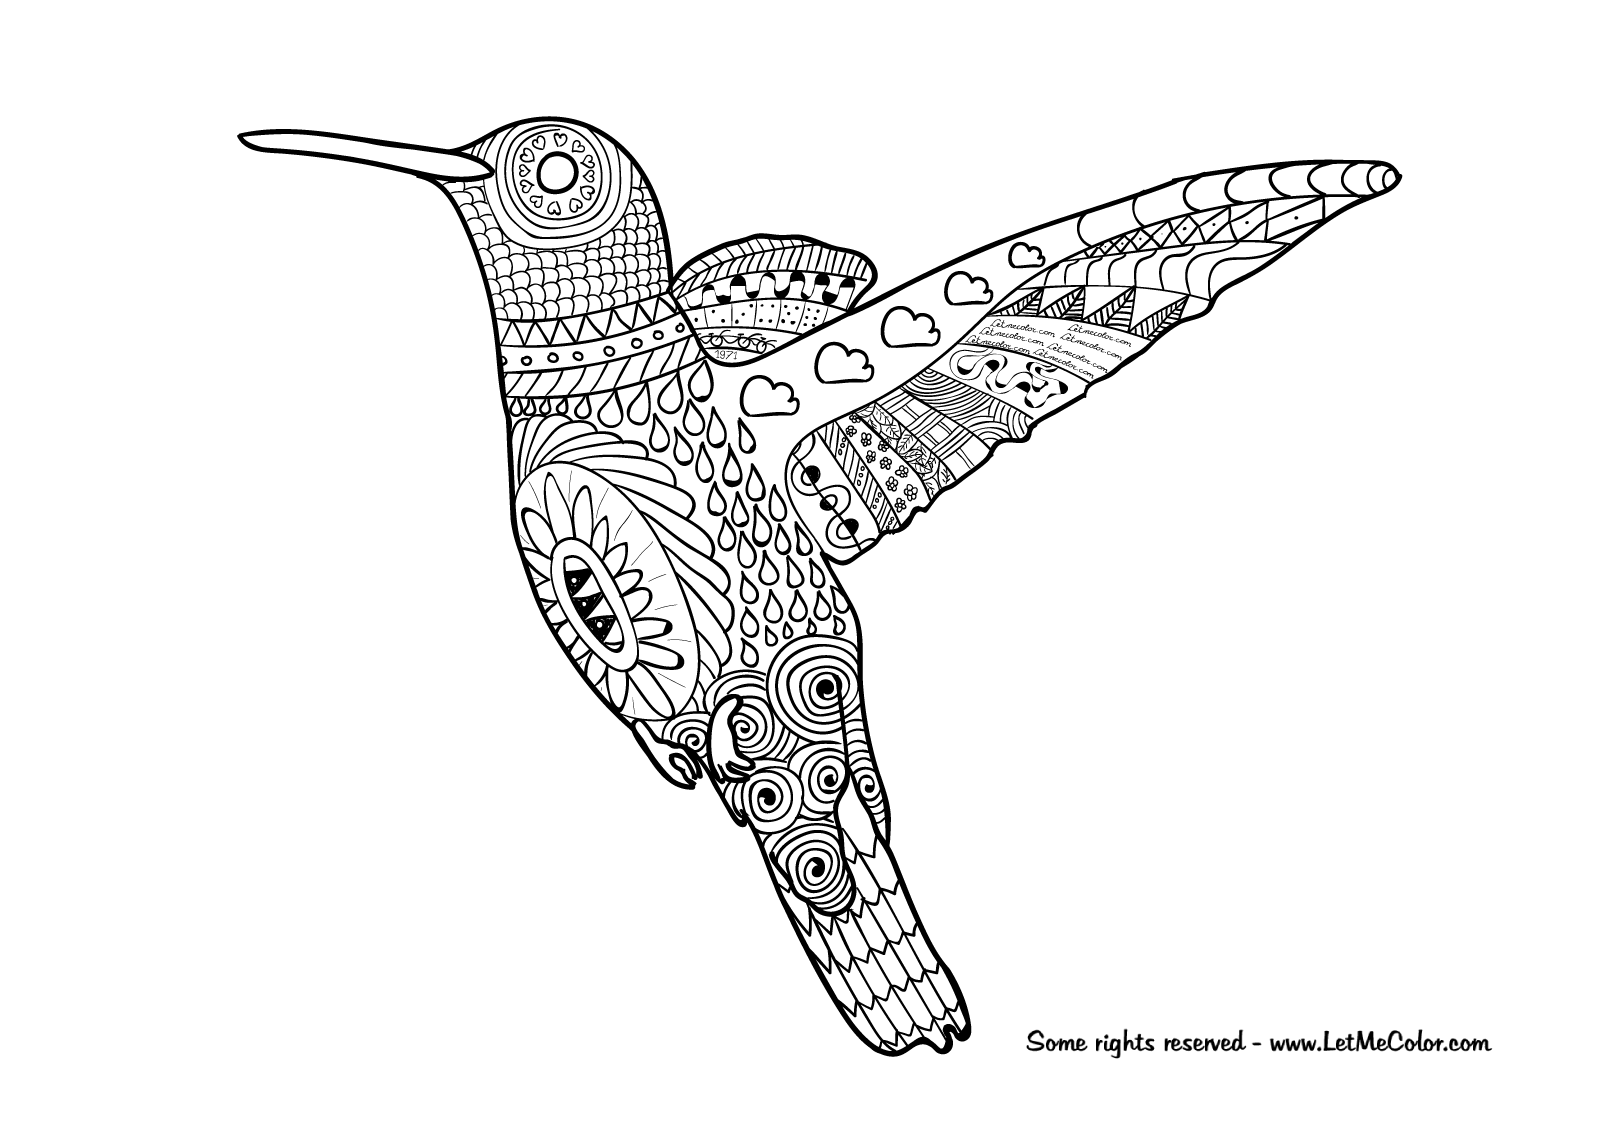 Hummingbird adult coloring page